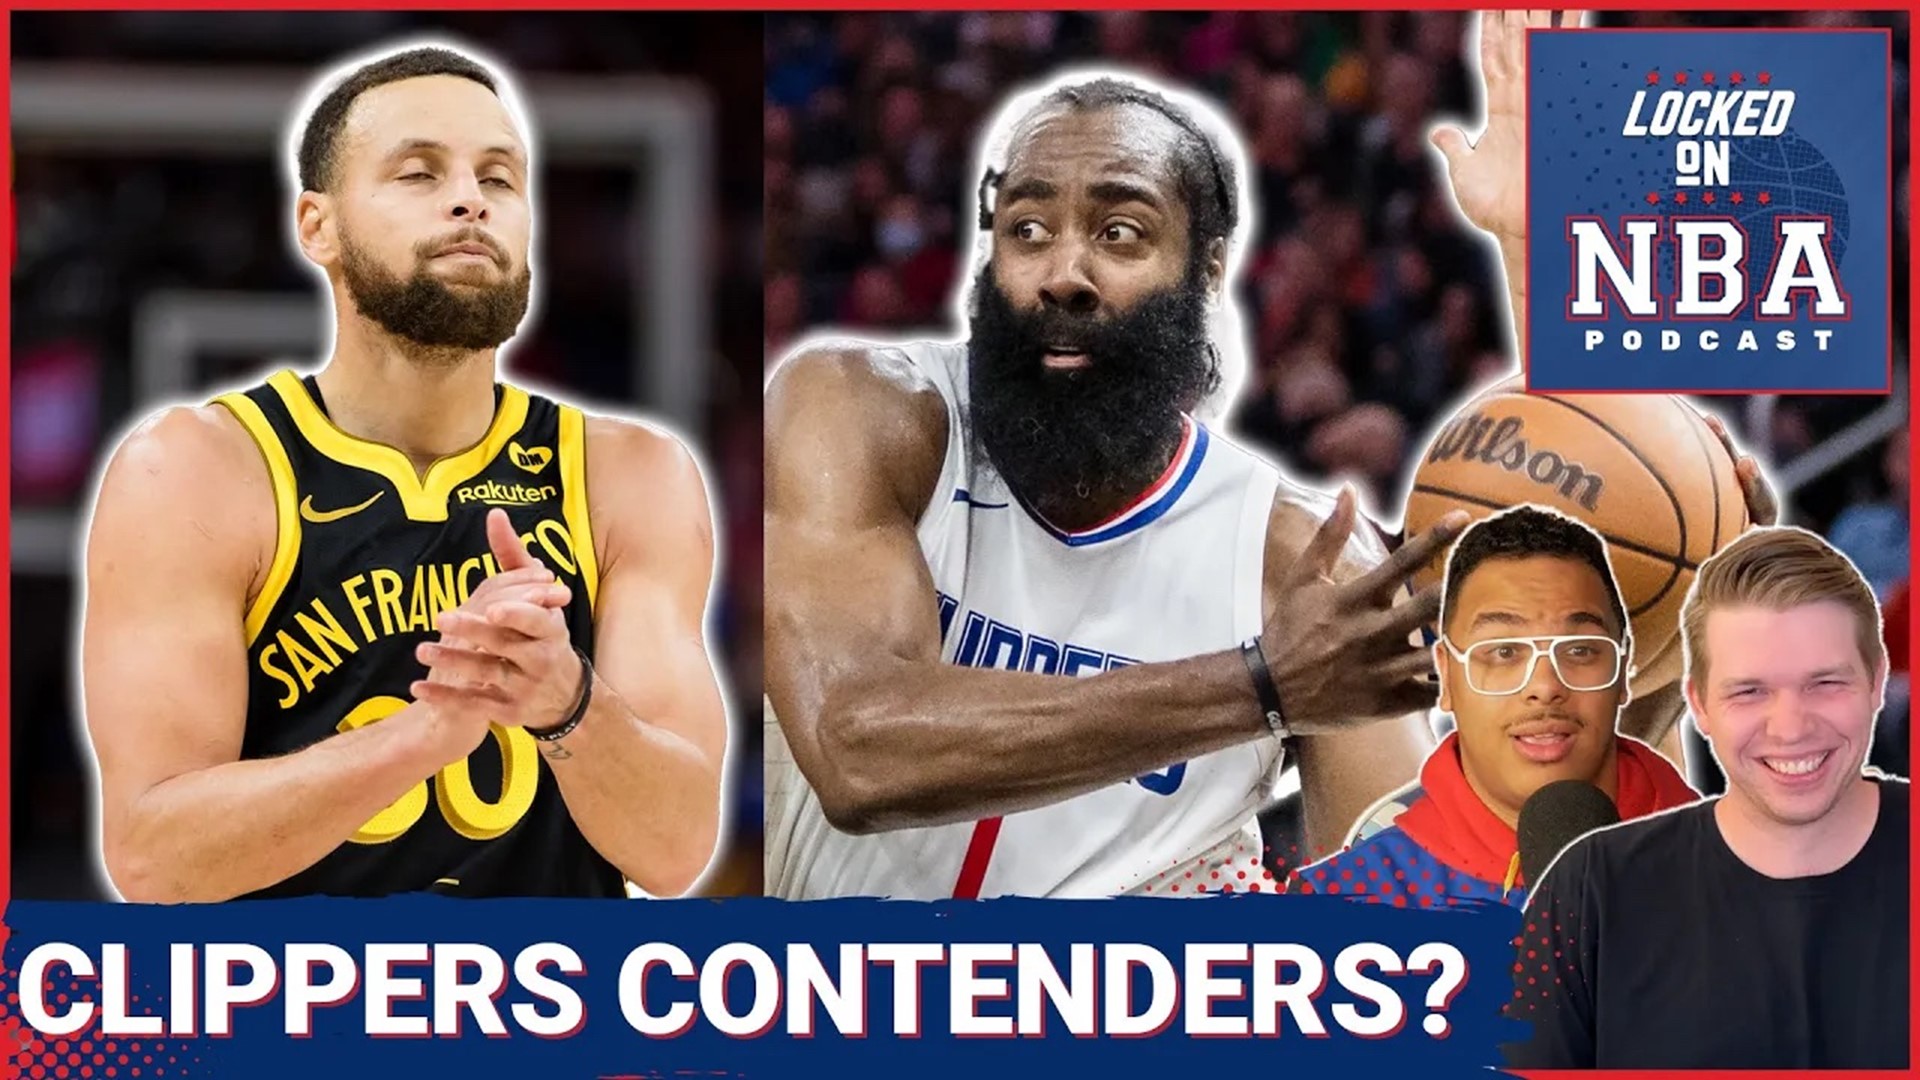 James Harden's Los Angeles Clippers beat Steph Curry's Golden State Warriors, Donovan Mitchell's Cleveland Cavaliers are surging, and more.